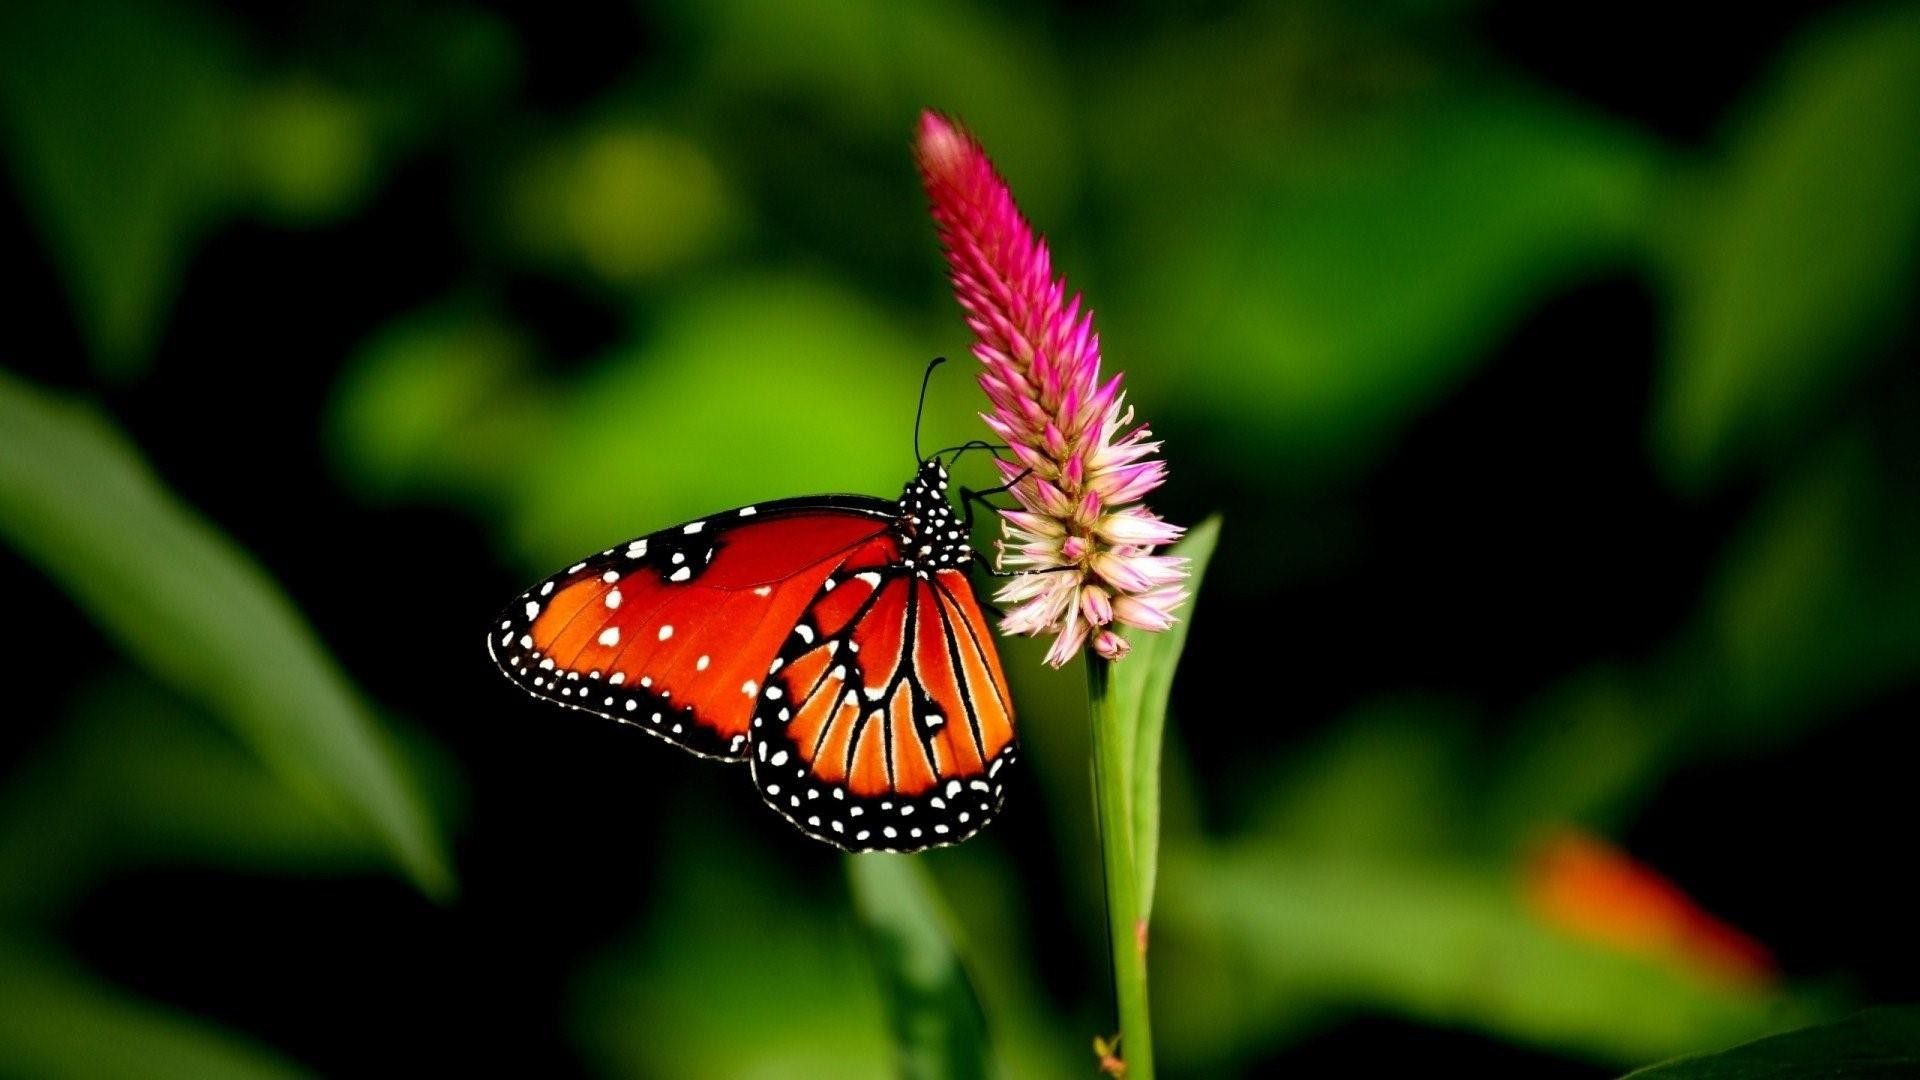 Red Butterfly Wallpaper